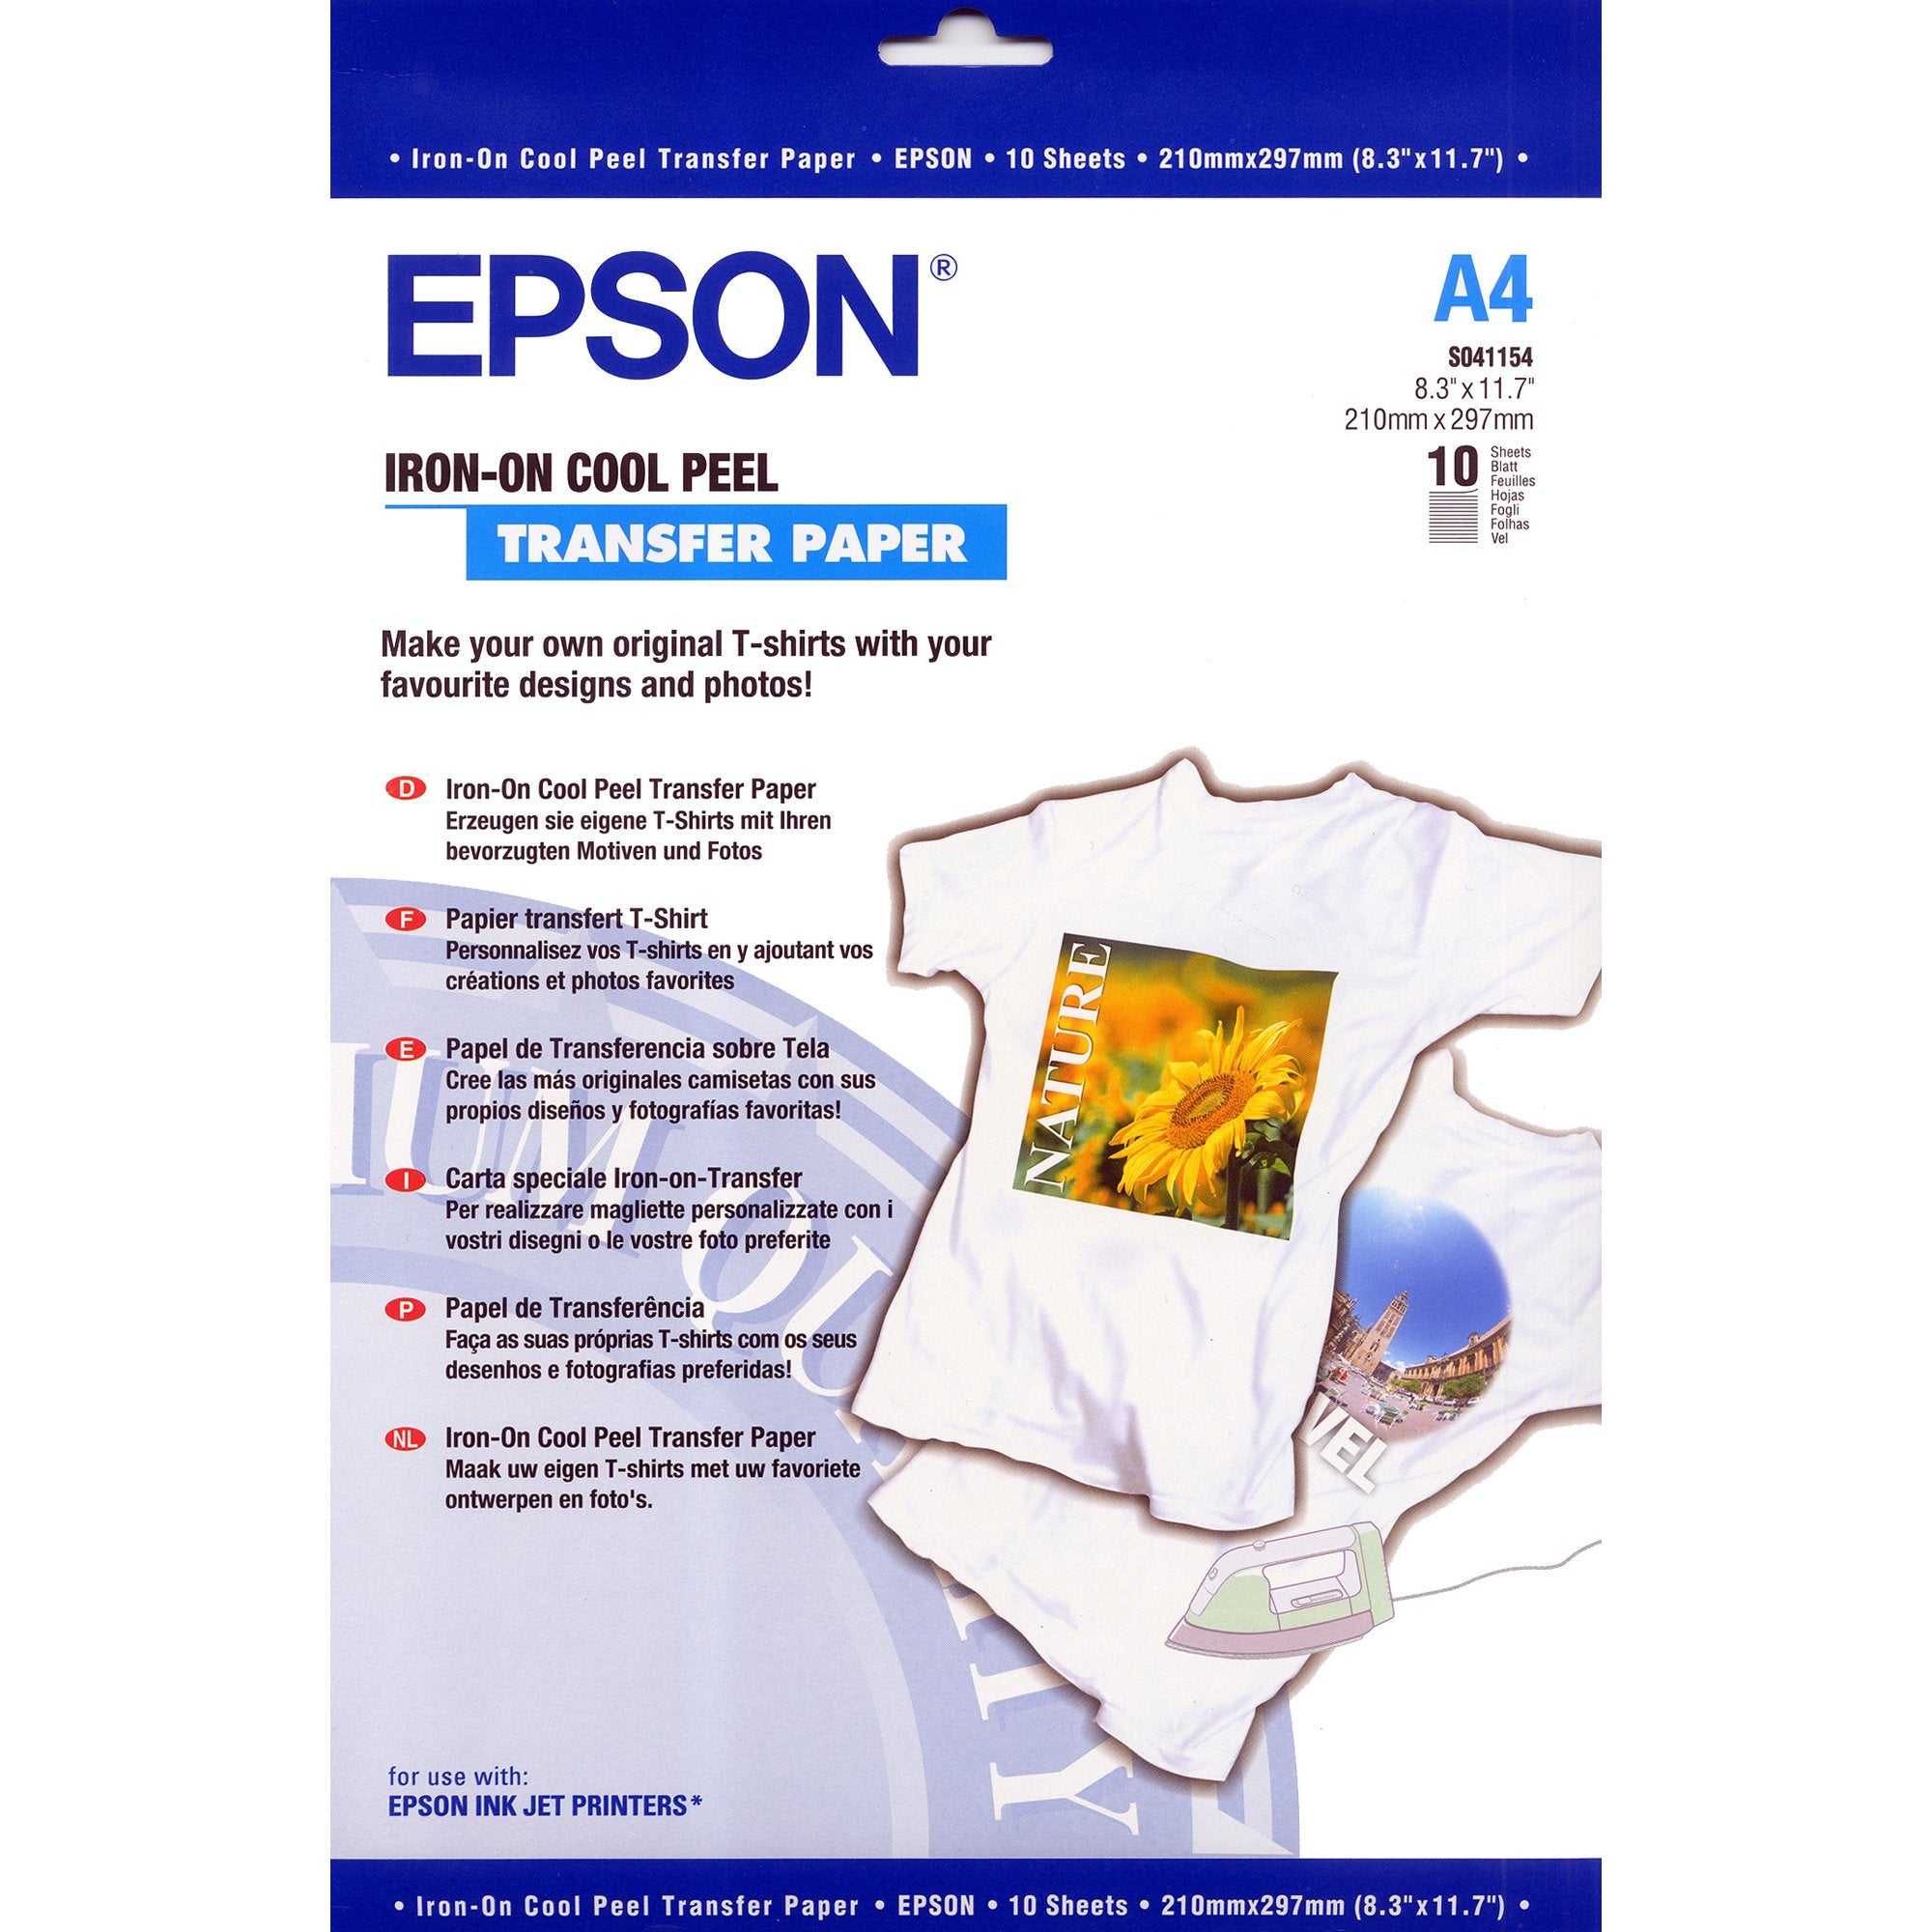 epson-carta-speciale-stampa-inkjet-tessuto-10fg-124gr-210x297mm-a4